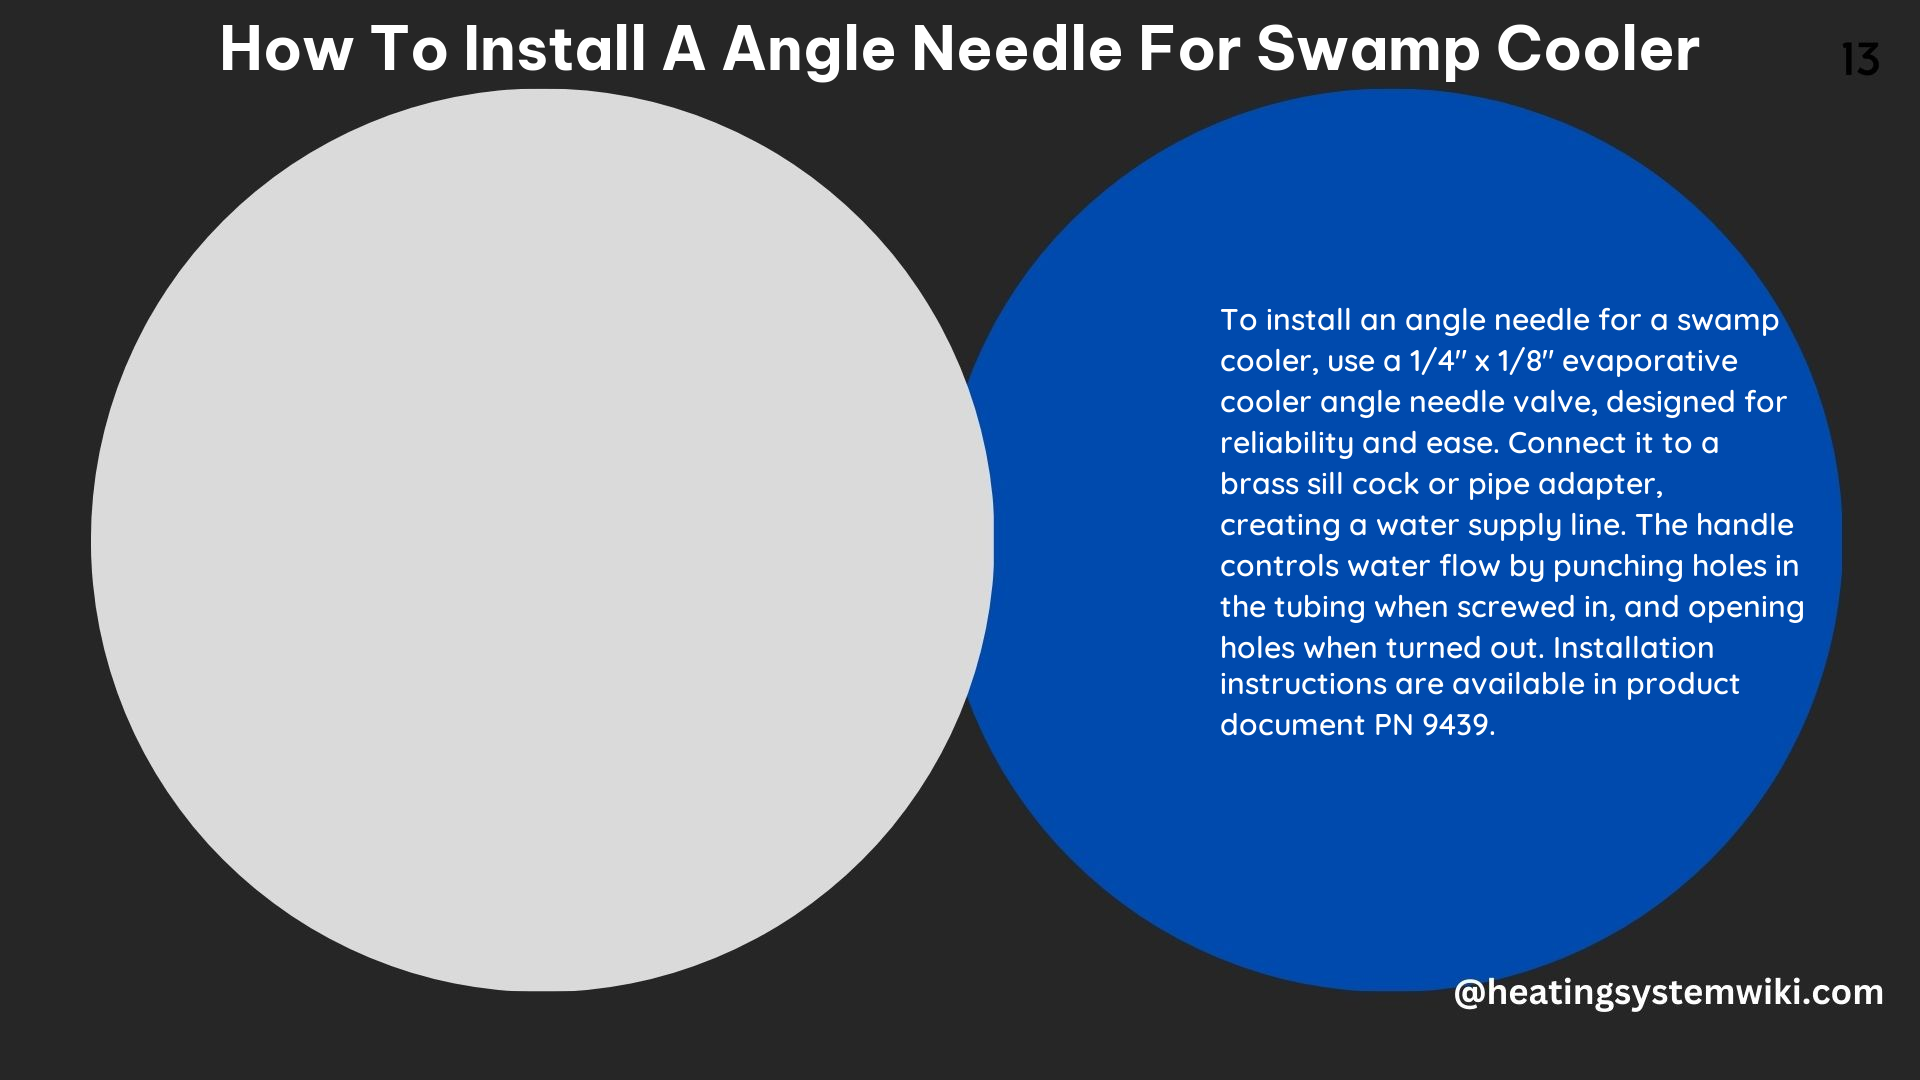 How to Install a Angle Needle for Swamp Cooler